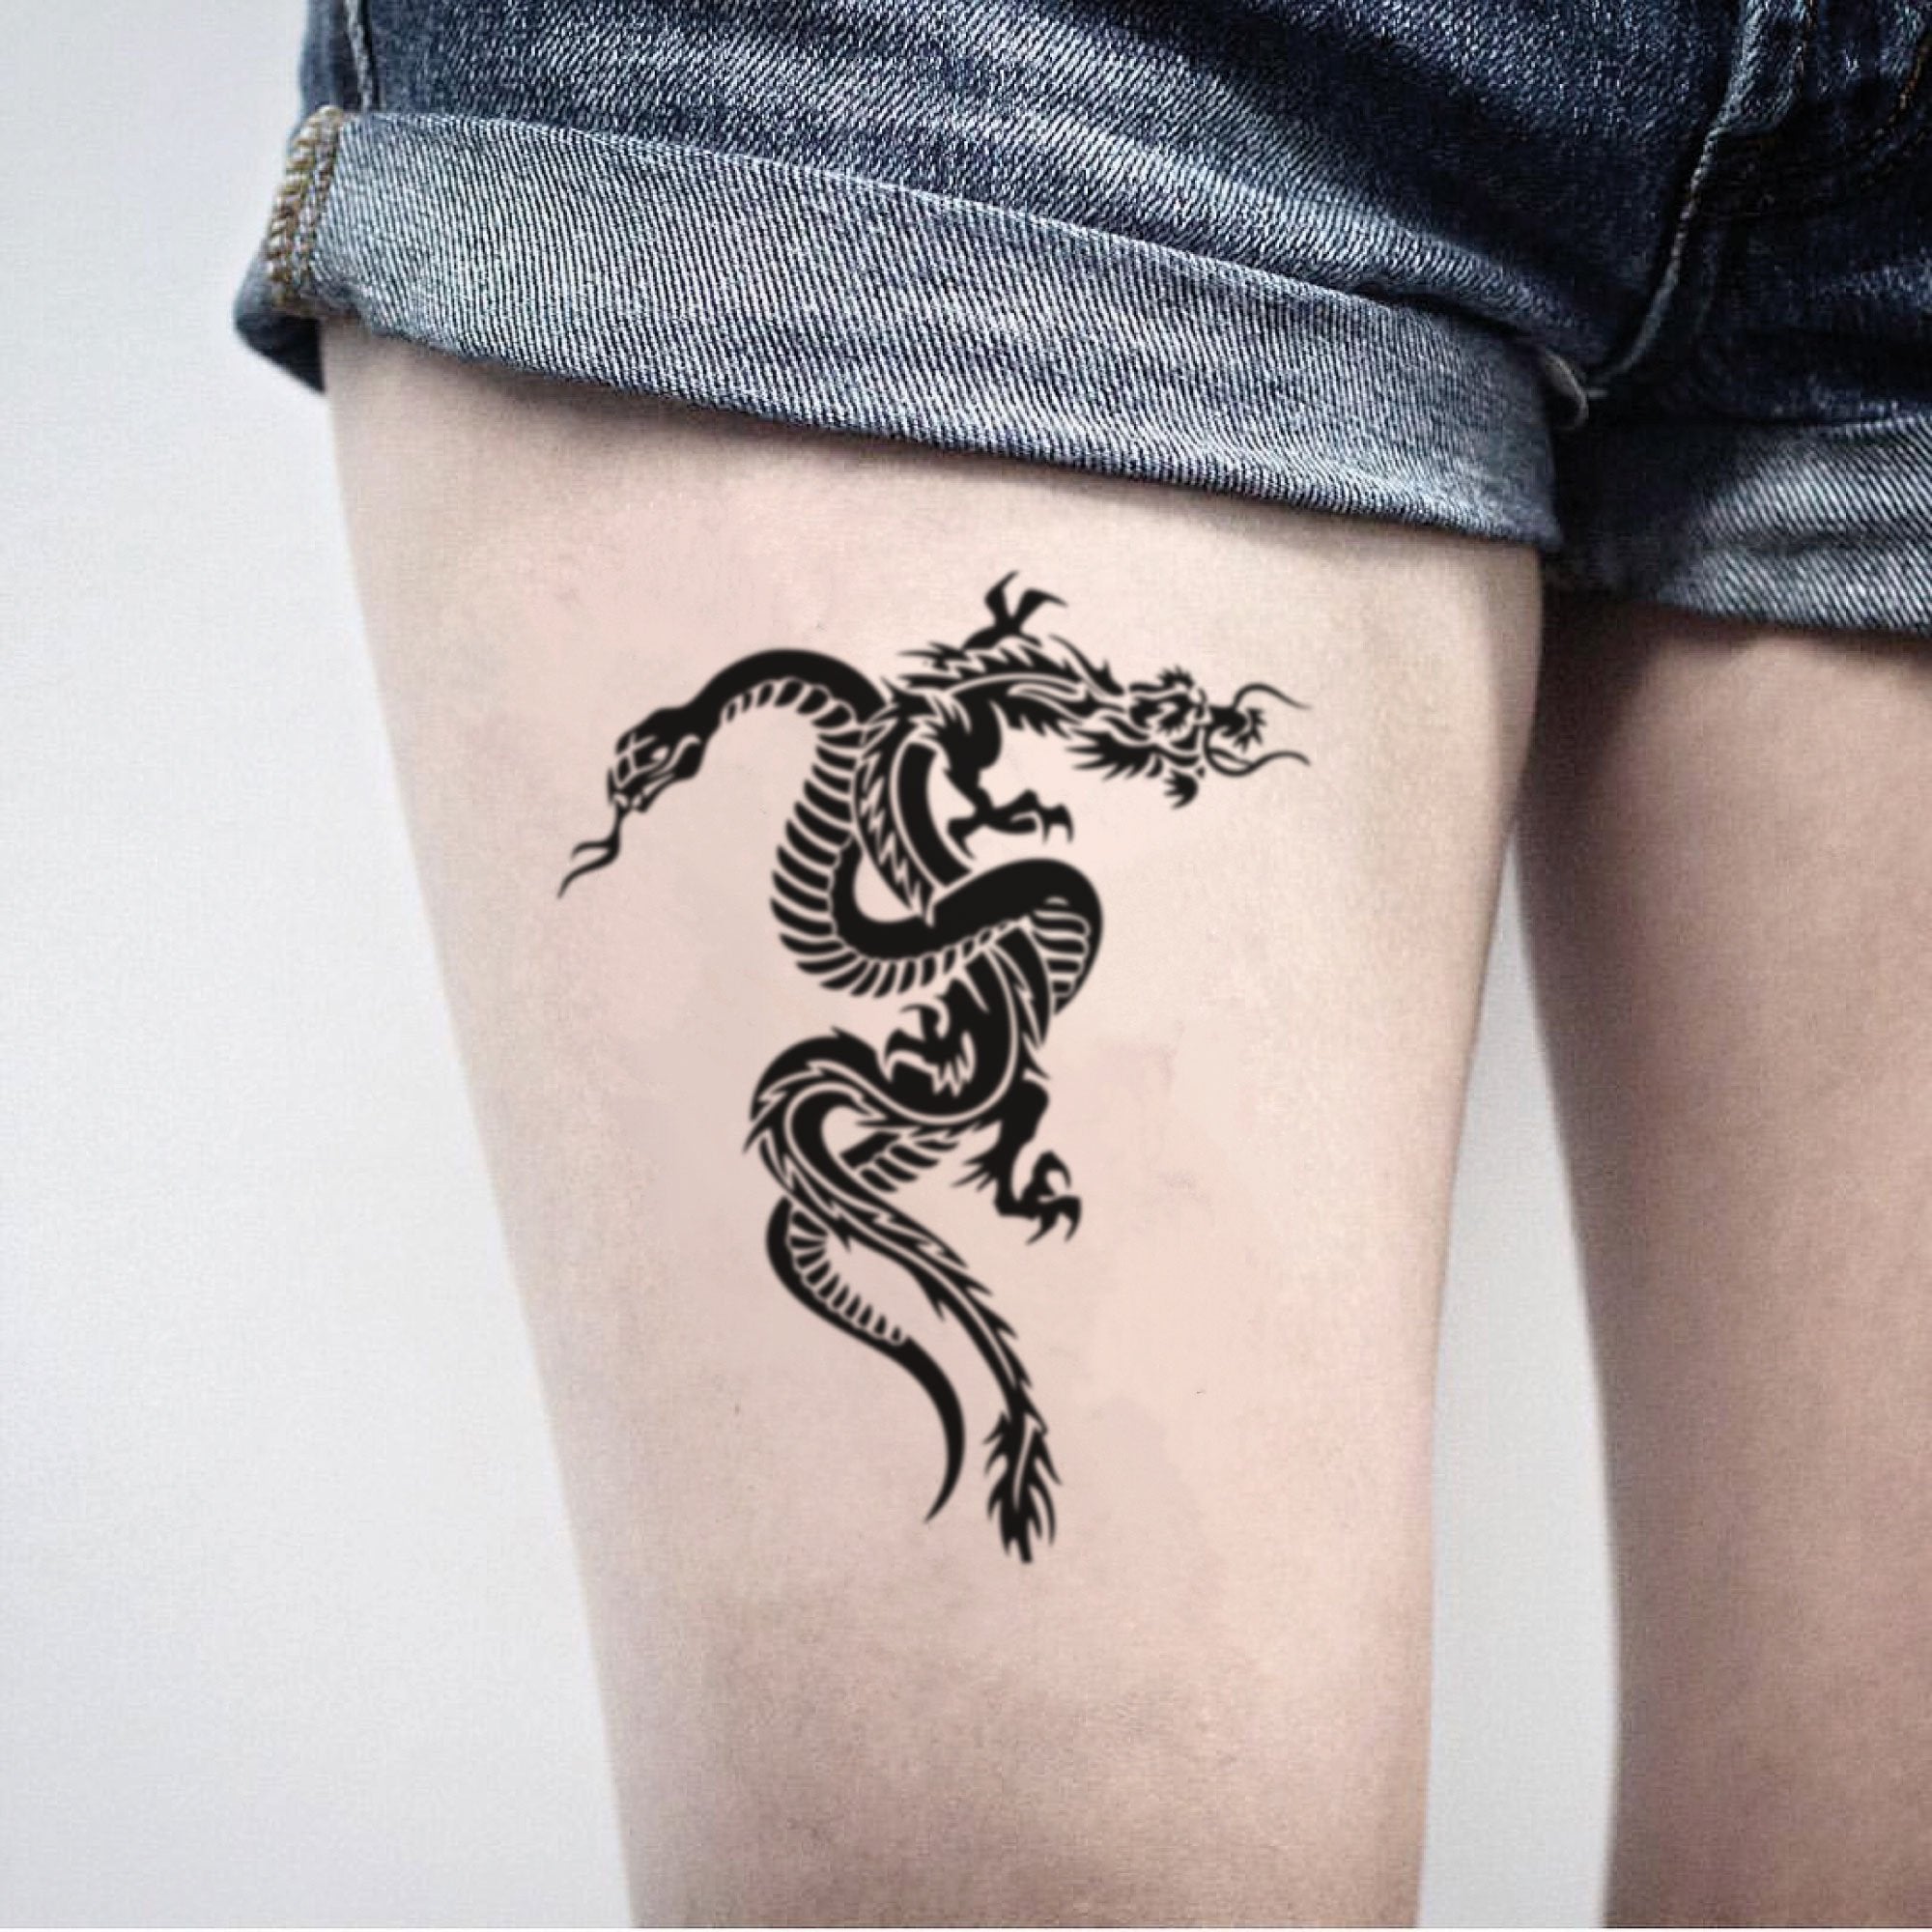 Body Art Men Big Temporary Dragon Tattoo : Buy Online at Best Price in KSA  - Souq is now Amazon.sa: Beauty